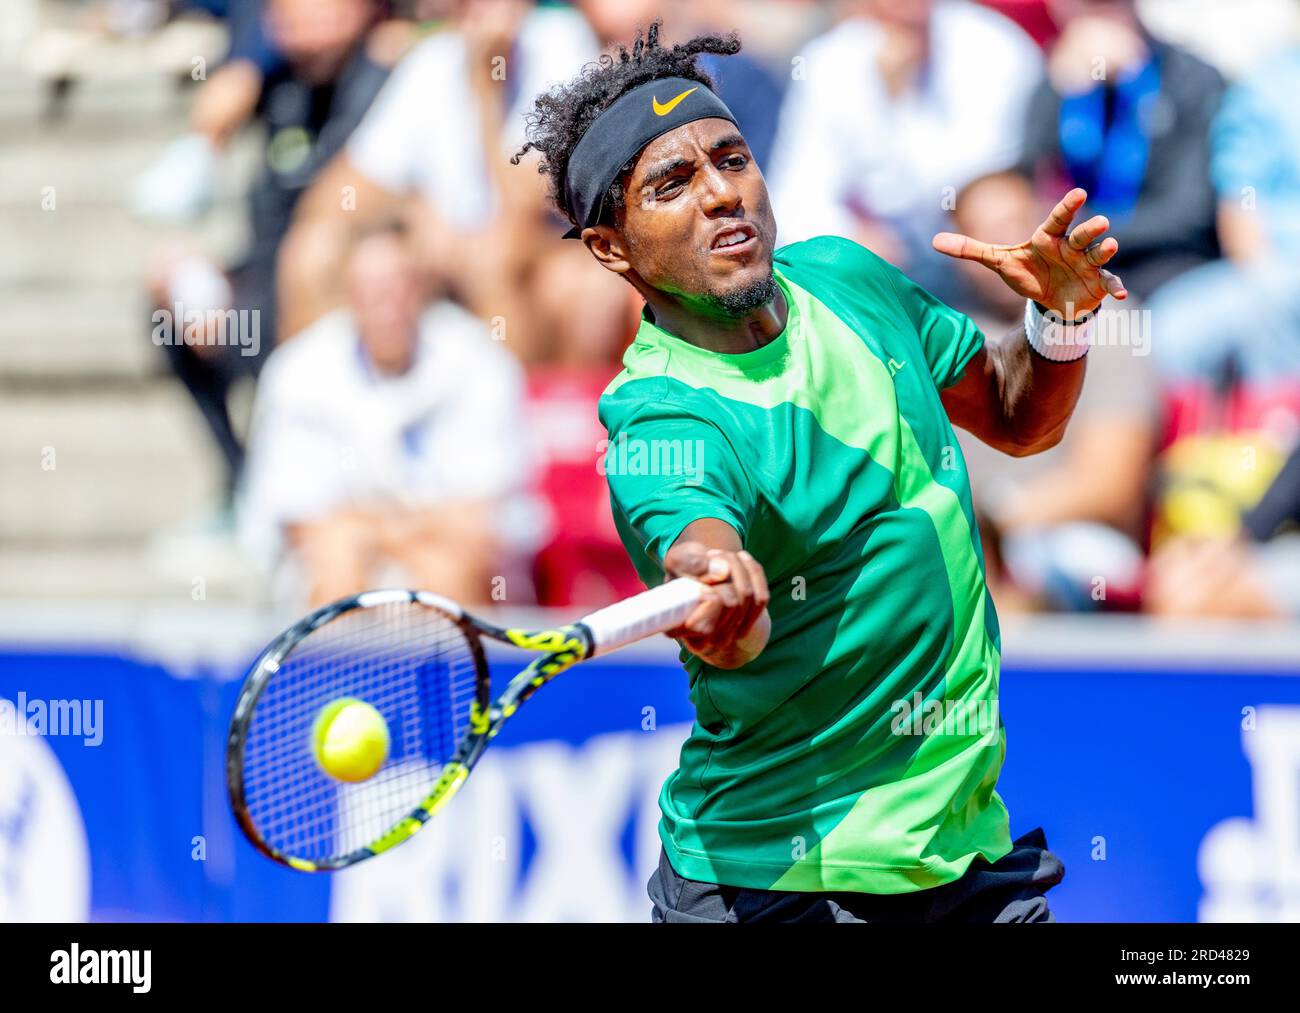 Elias Ymer of Sweden in action during a tennis match against Leo Borg of Sweden during the Swedish Open ATP tennis tournament in Bastad, Sweden, on July 18, 2023